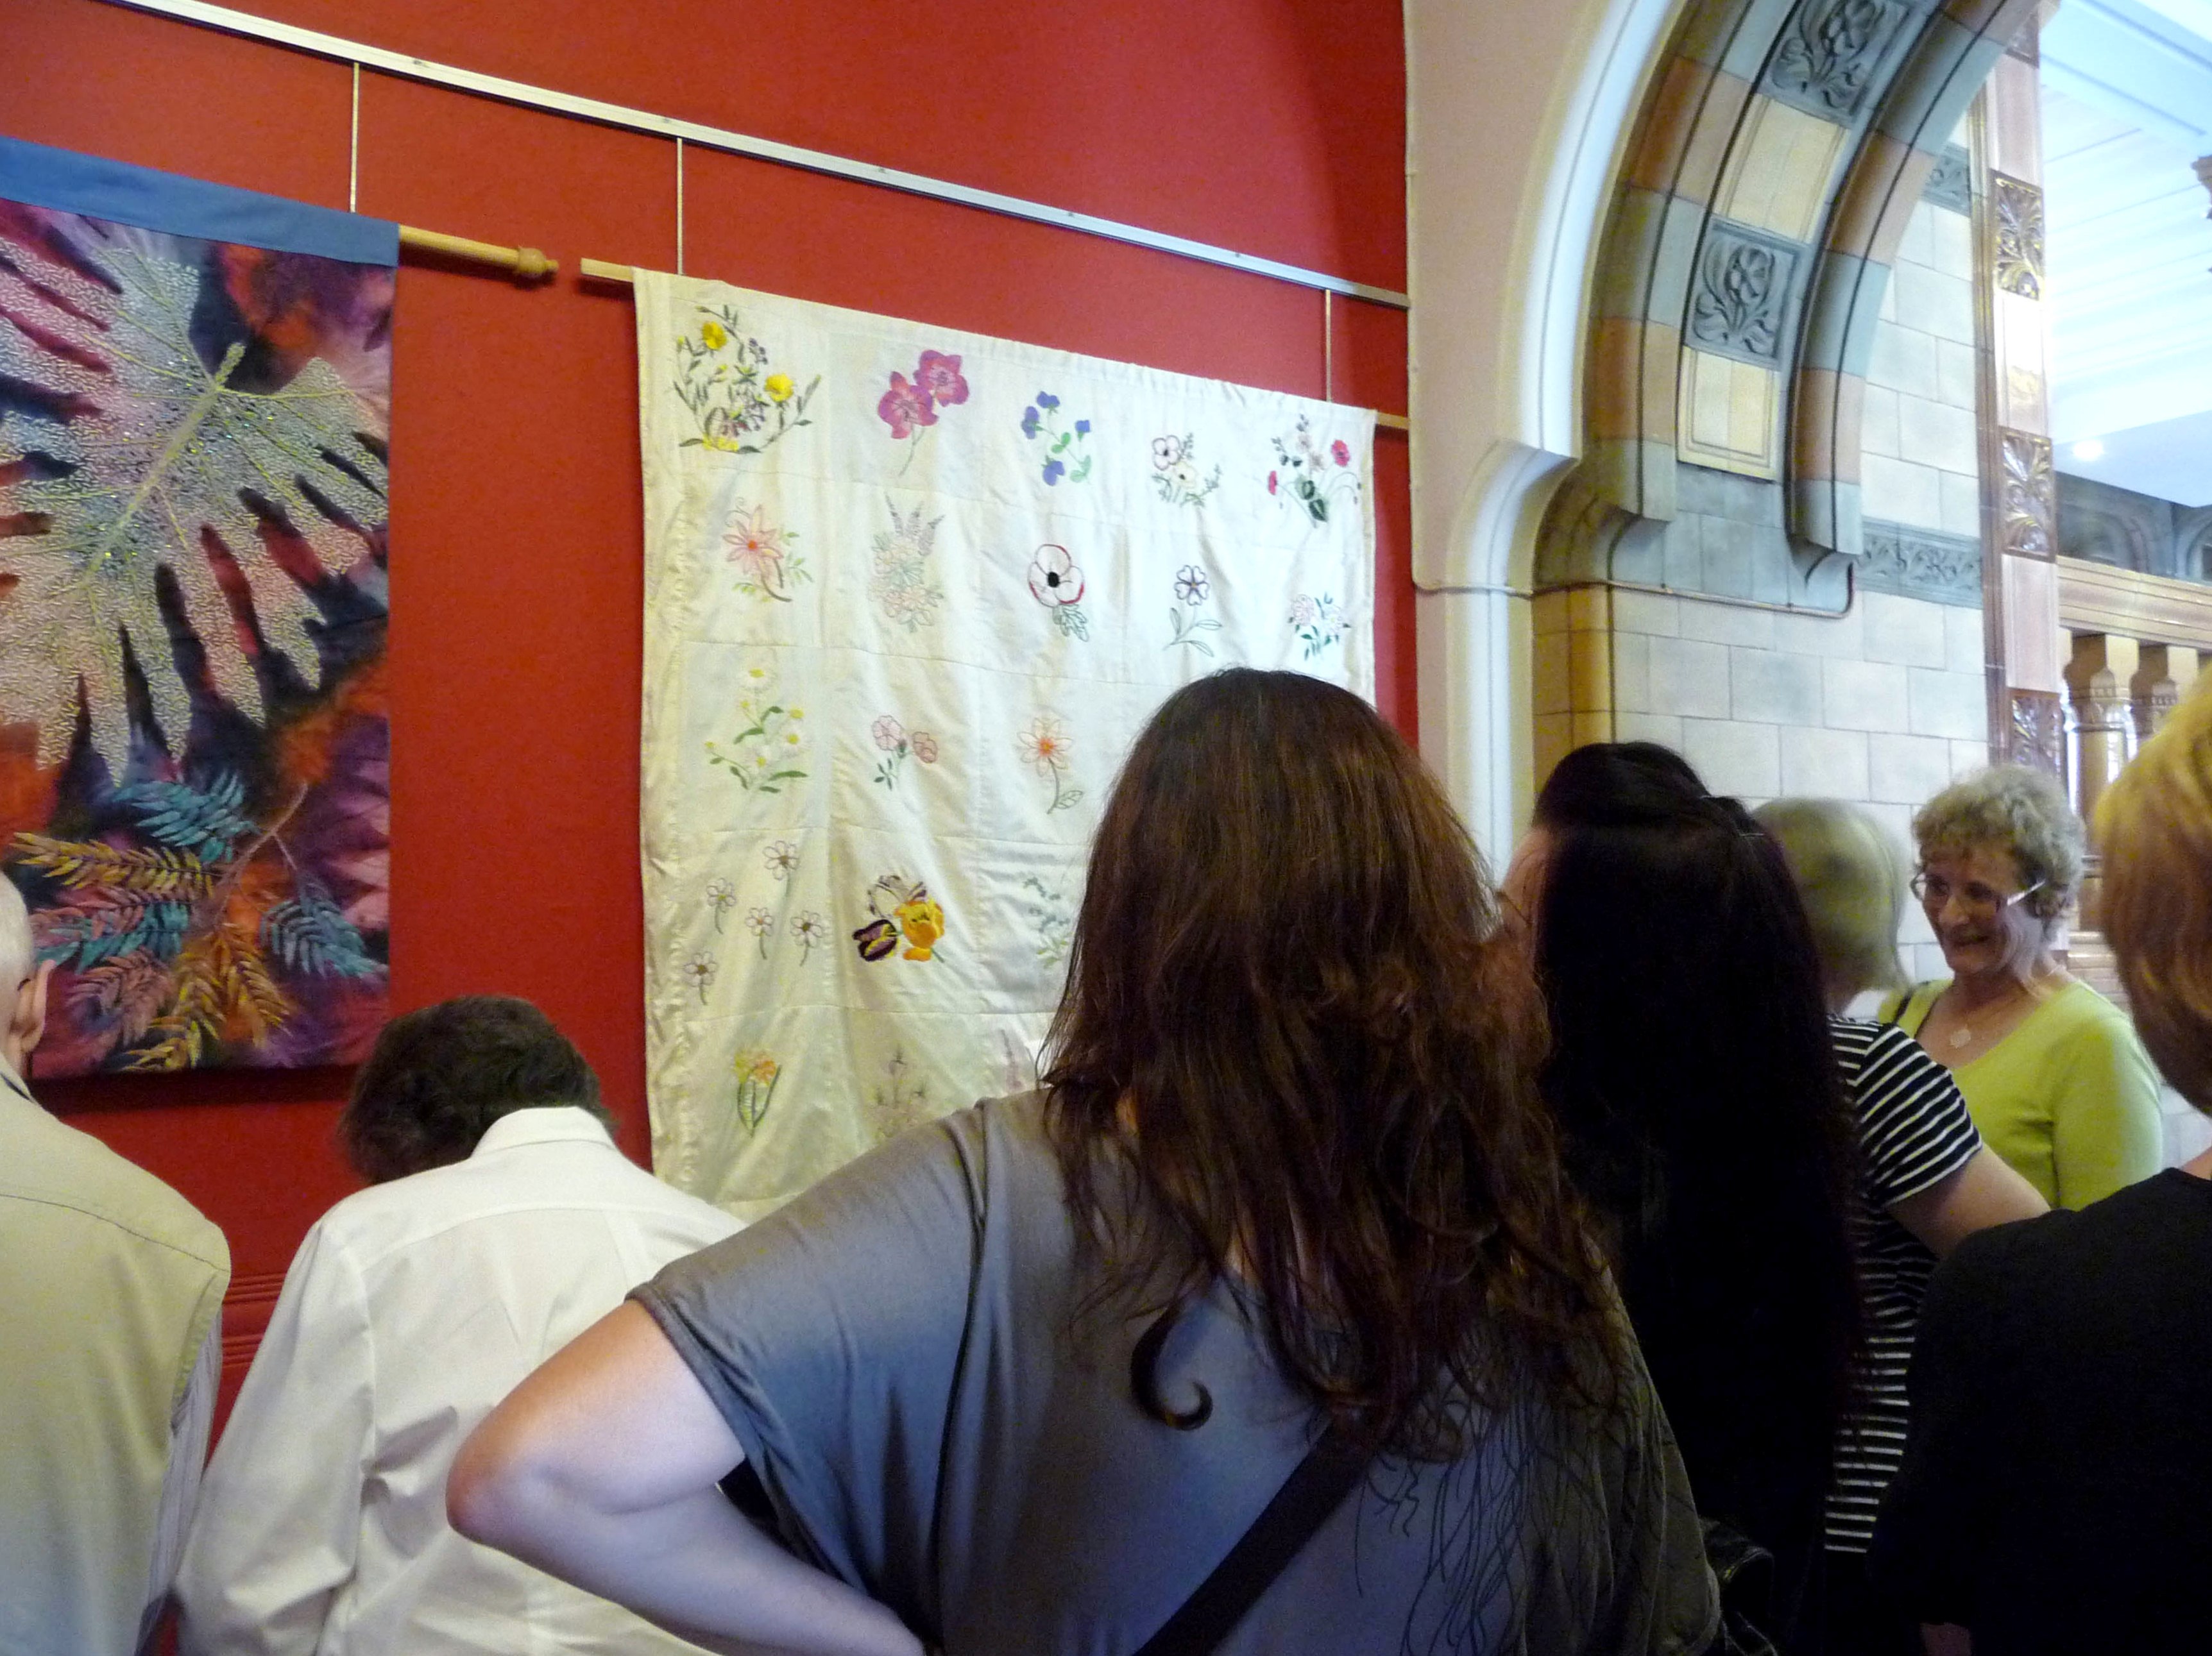 'Meet the Artists' day at GROWTH exhibition, Victoria Gallery, 2014